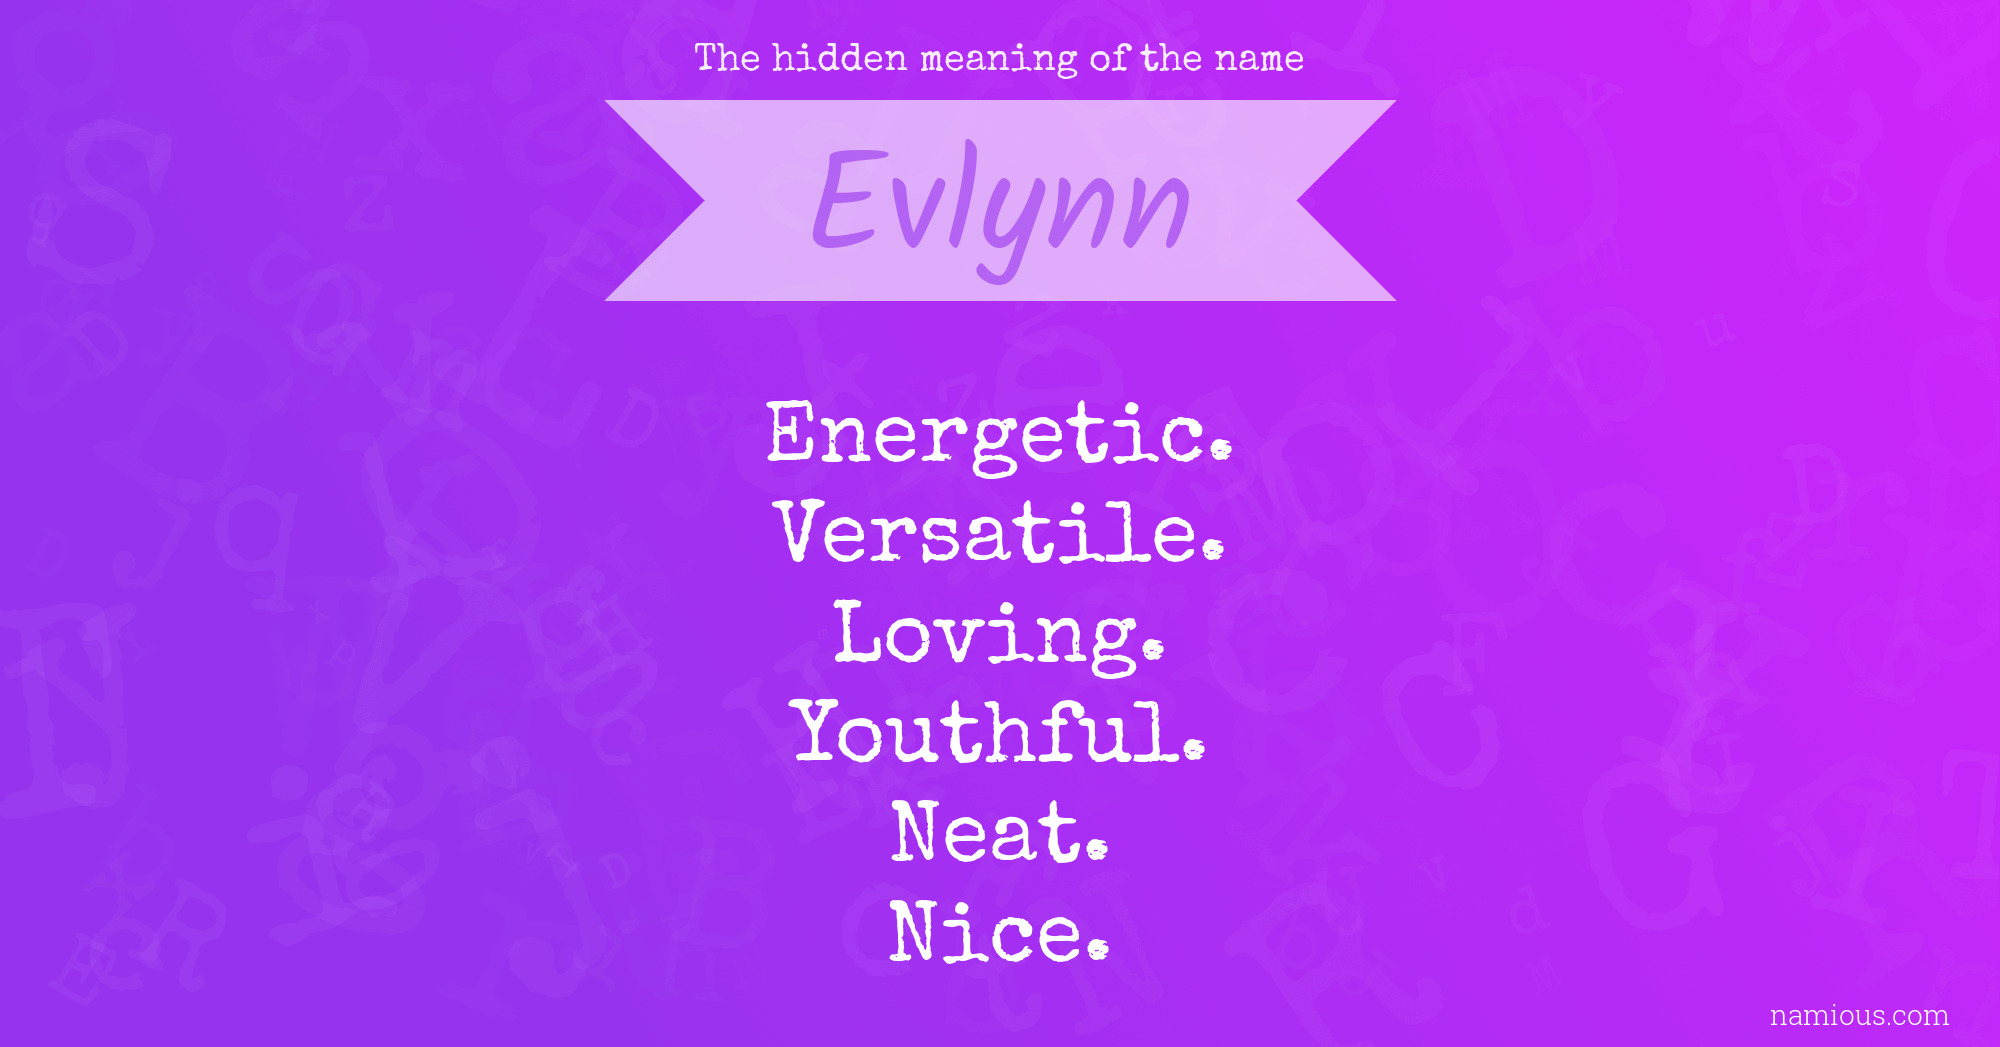 The hidden meaning of the name Evlynn